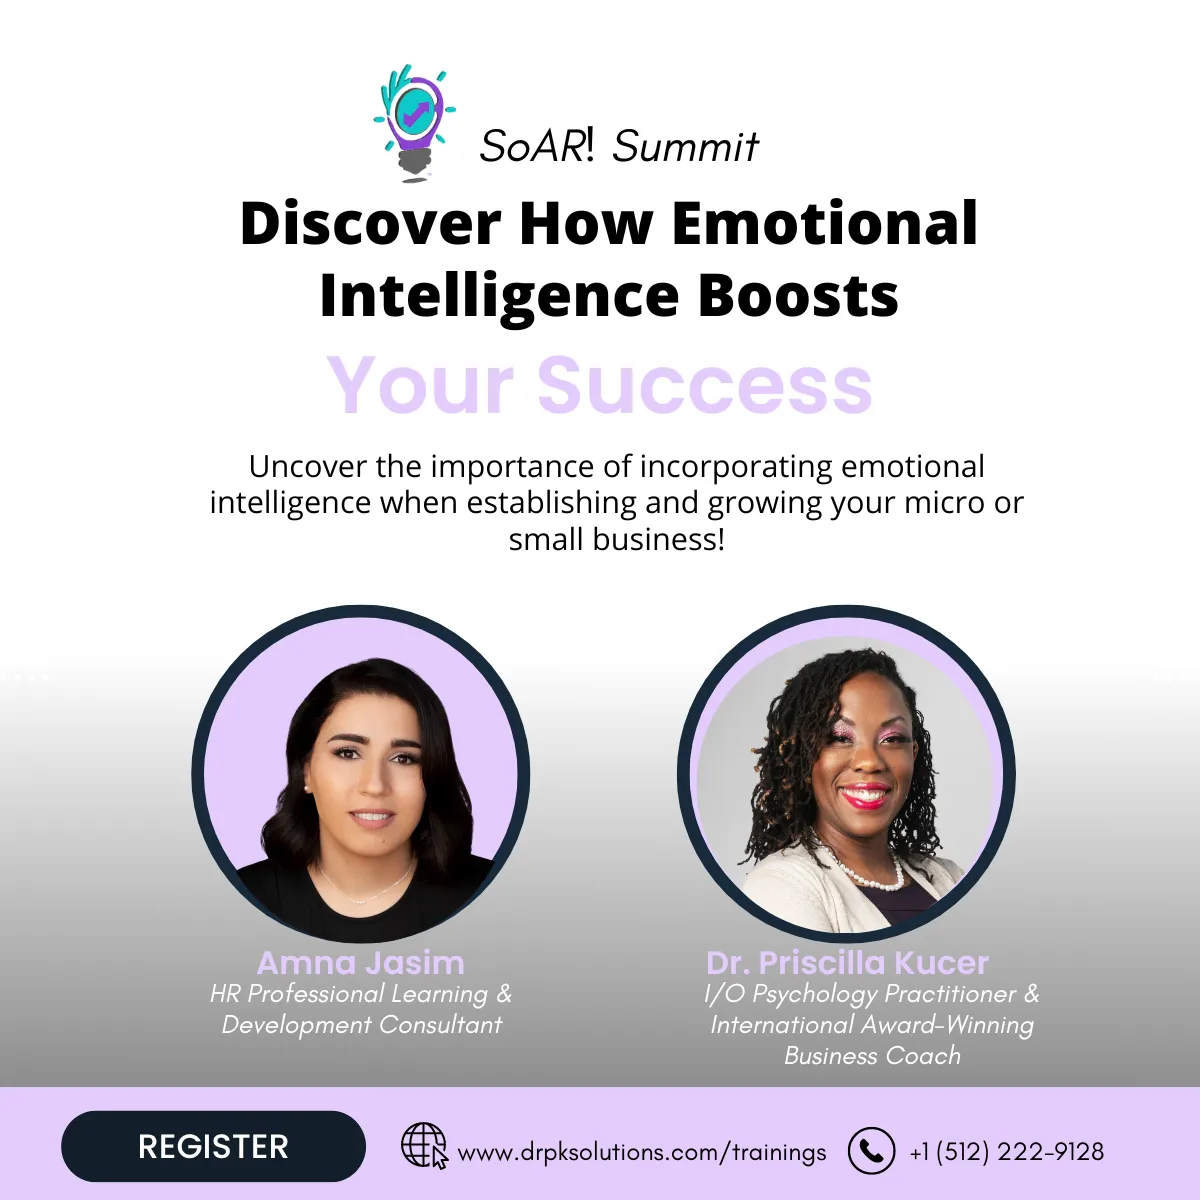 Discover How Emotional Intelligence Can Boost Your success 2-day workshop